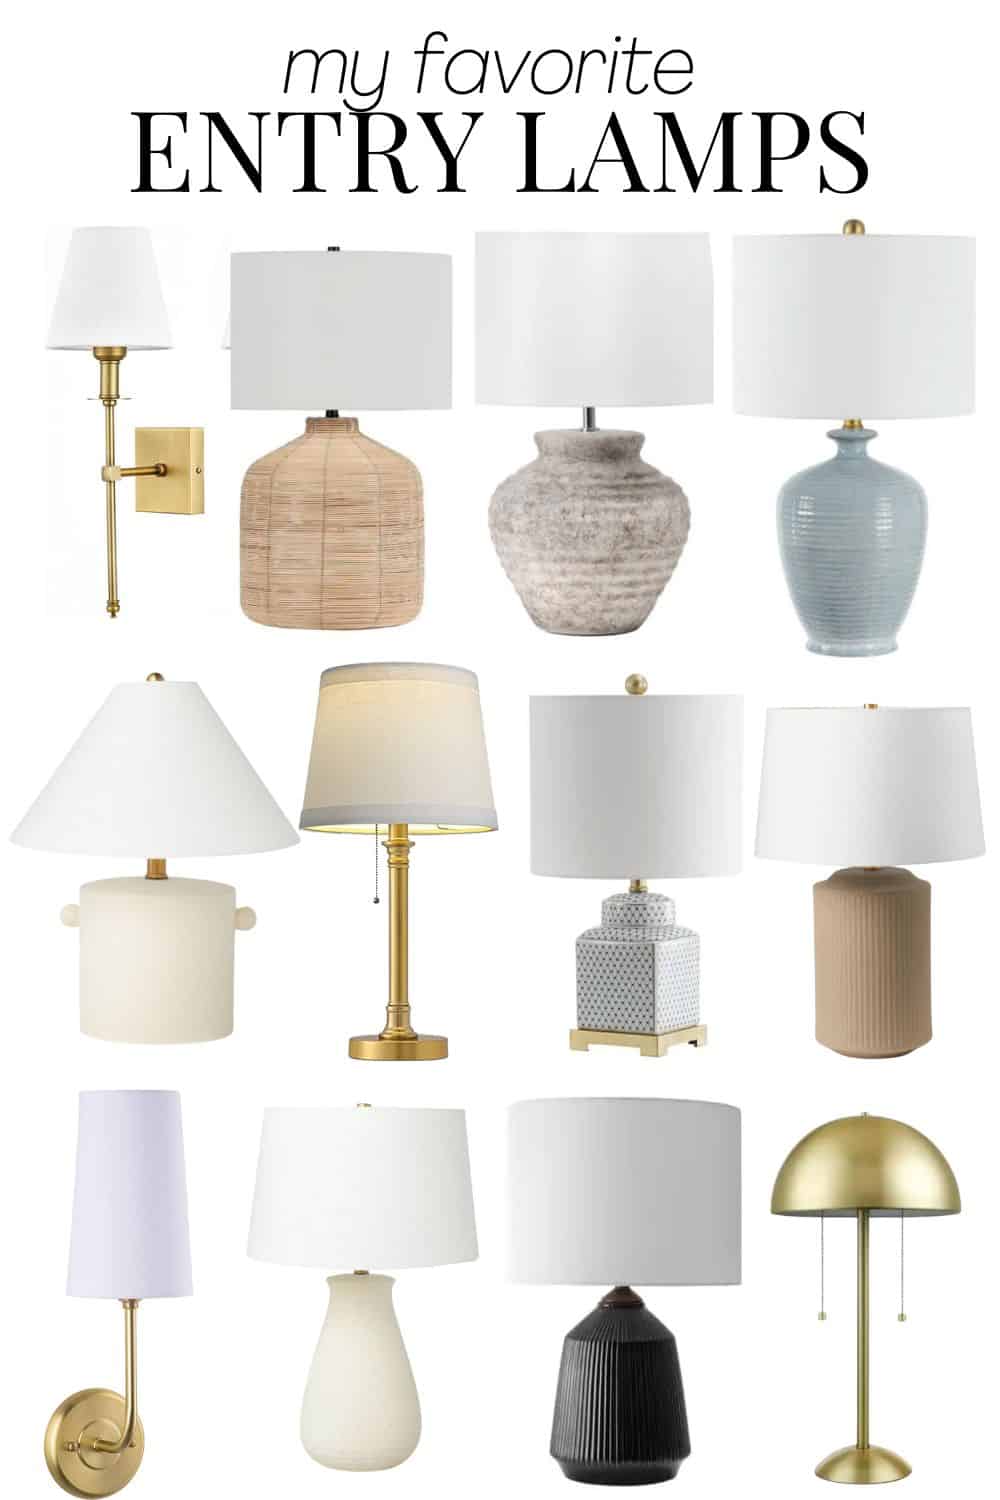 a collage of entry lamps